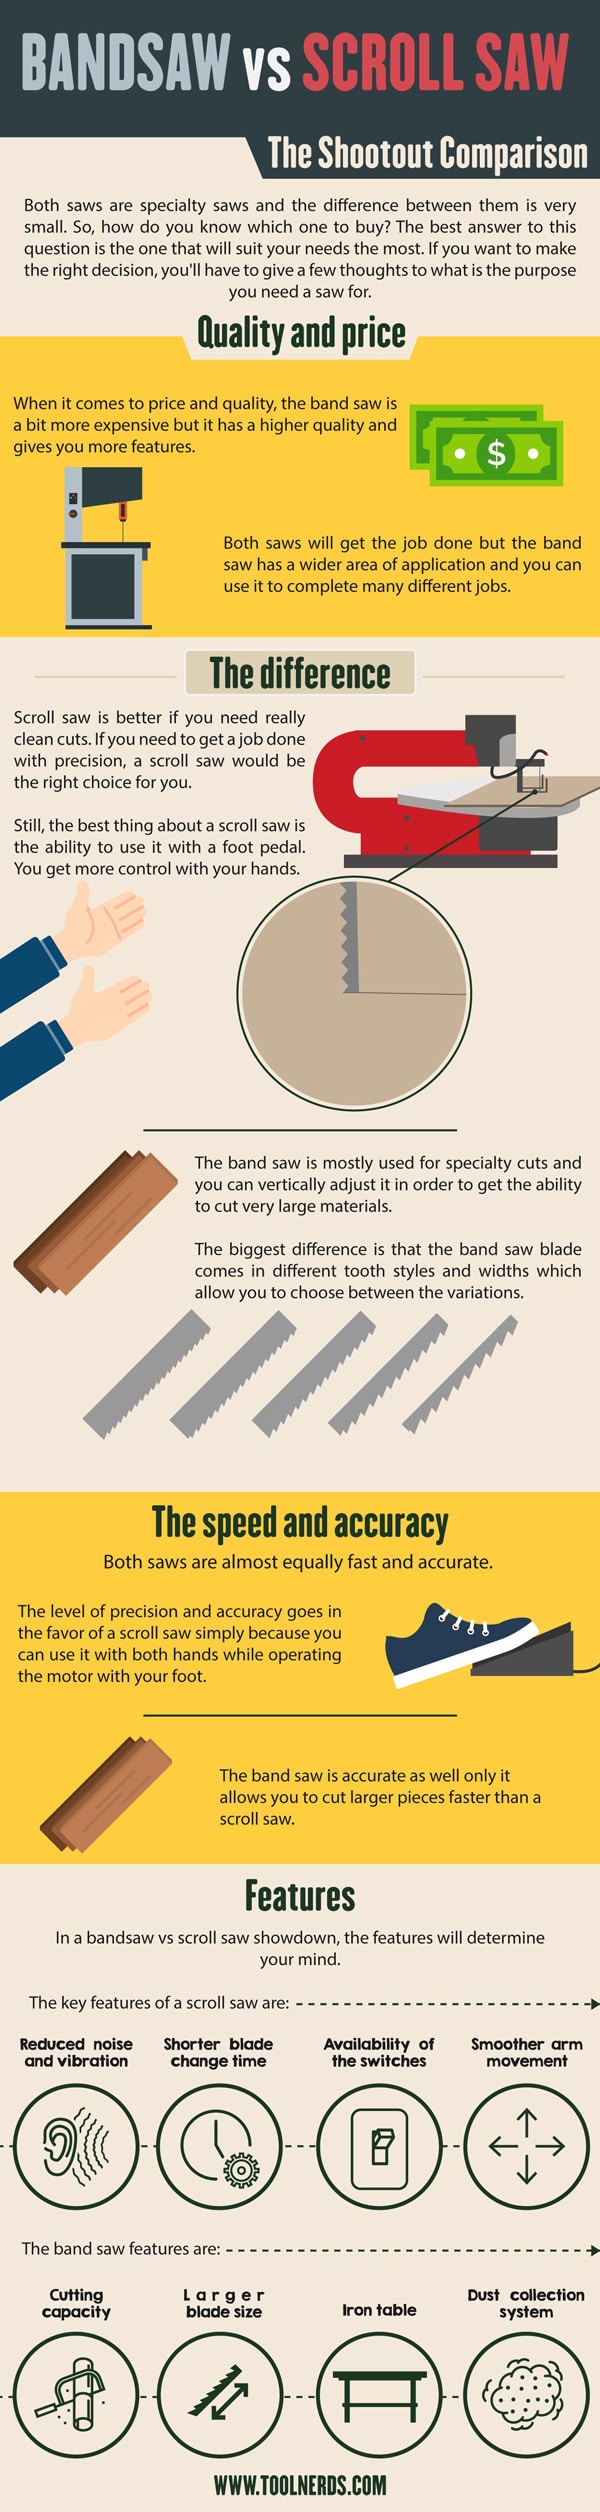 Bandsaw vs. Scroll Saw Infographic